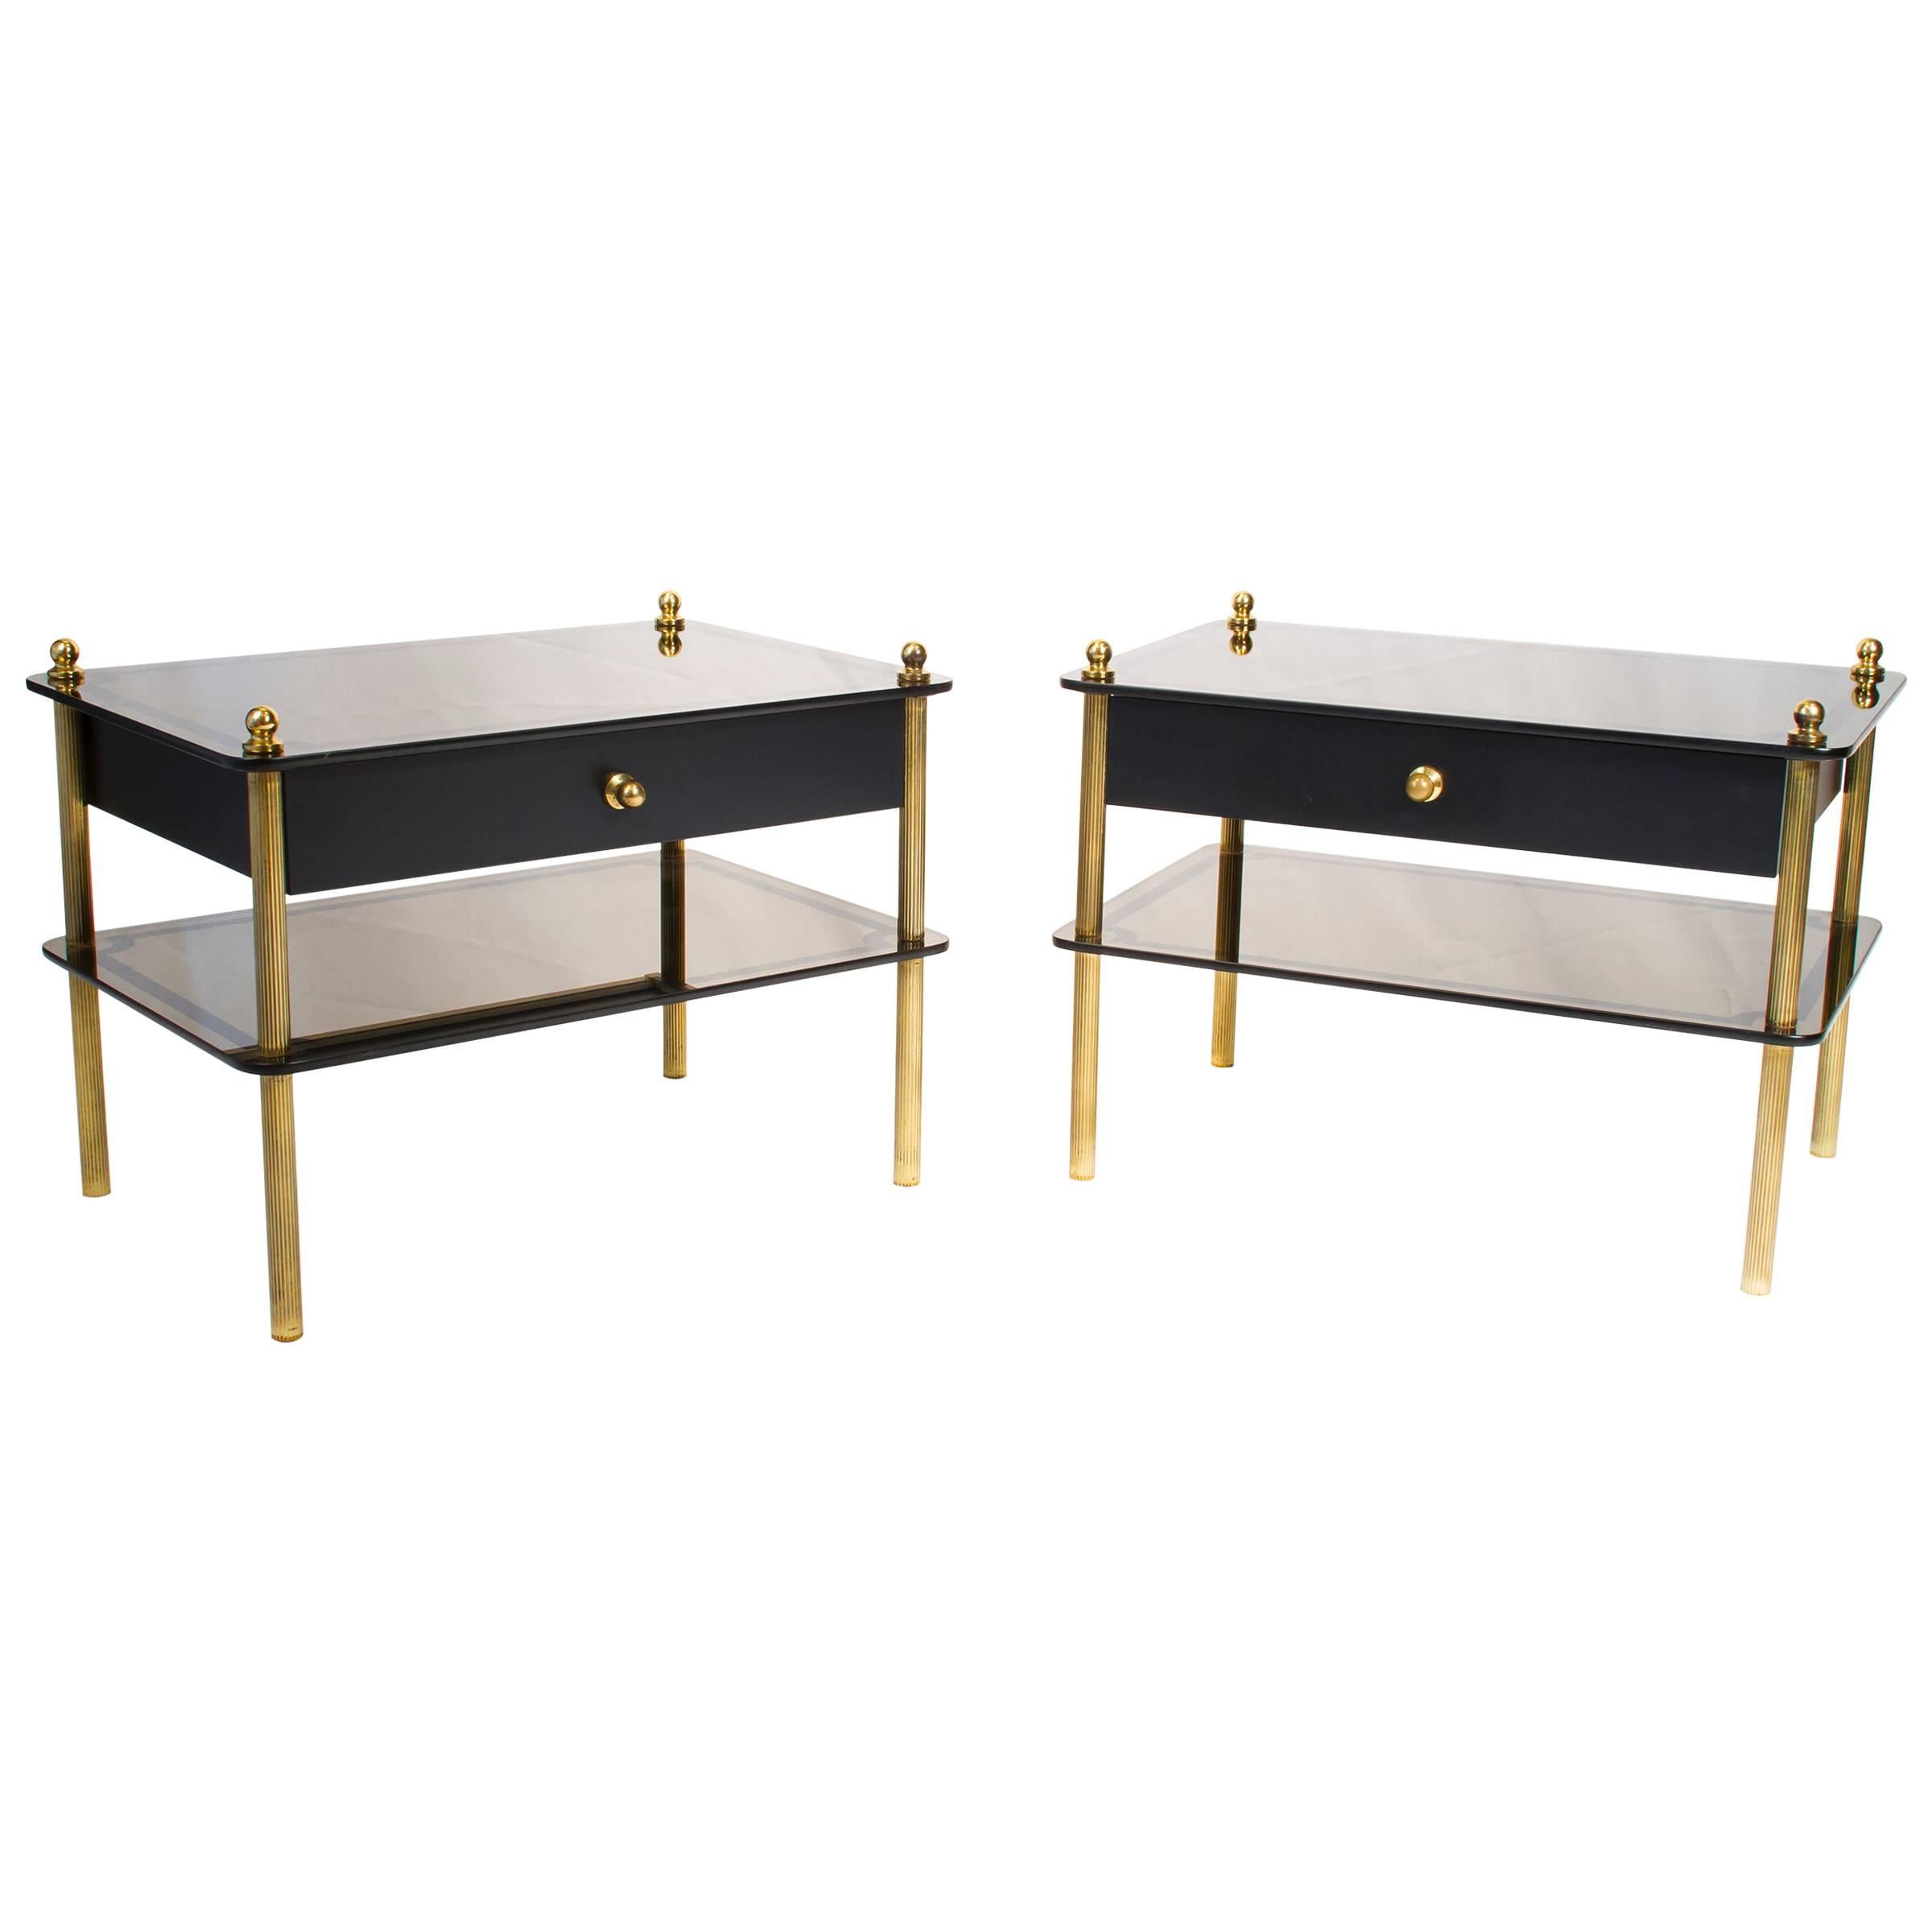 Pair of French Mid-Century Modern Mirrored Nightstands